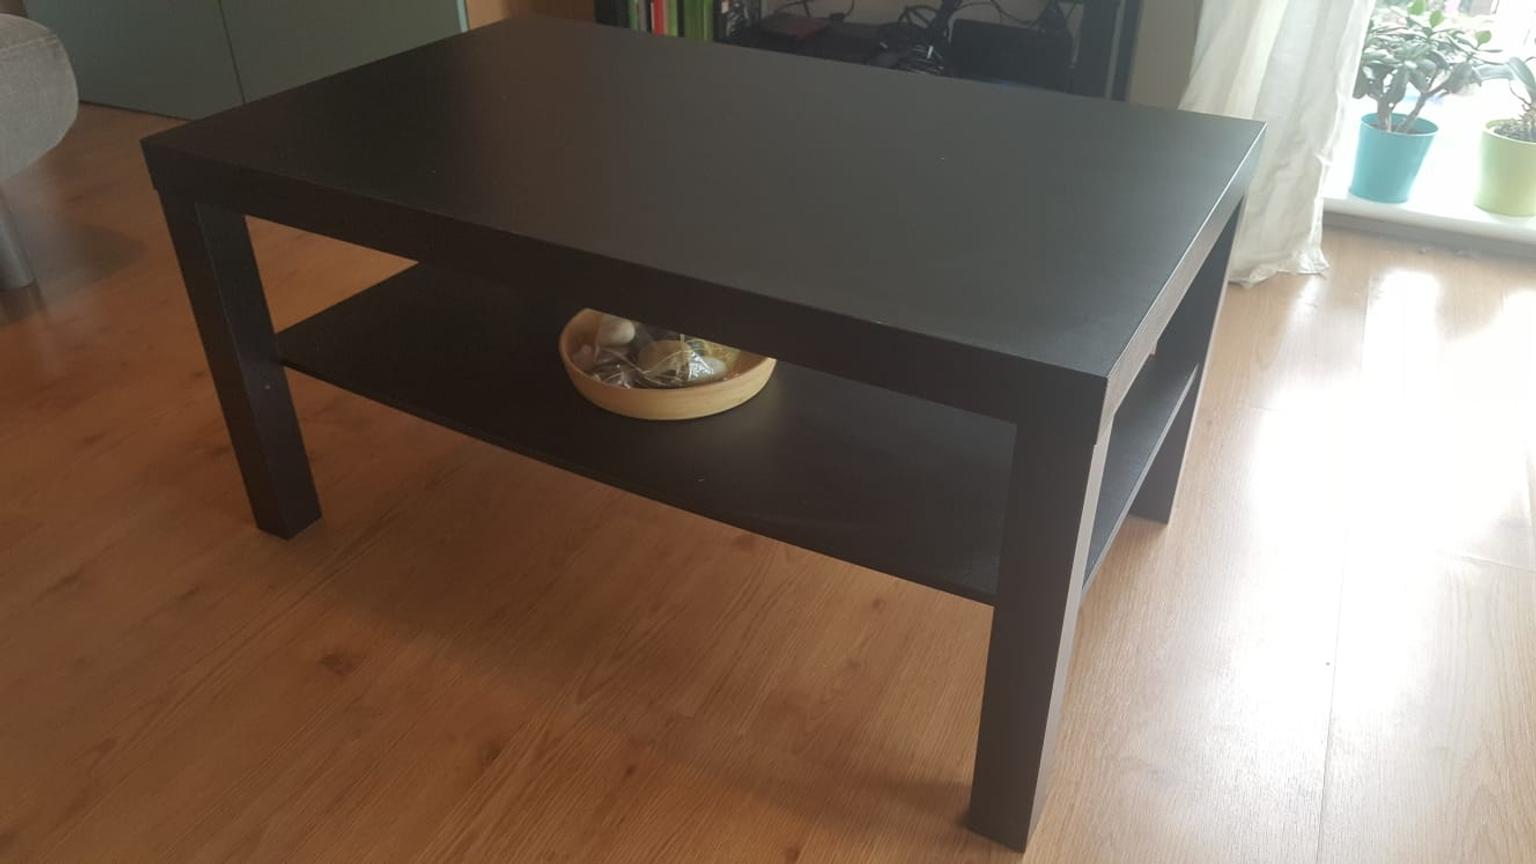 Ikea Lack Coffee Table In E3 London For 12 00 For Sale Shpock